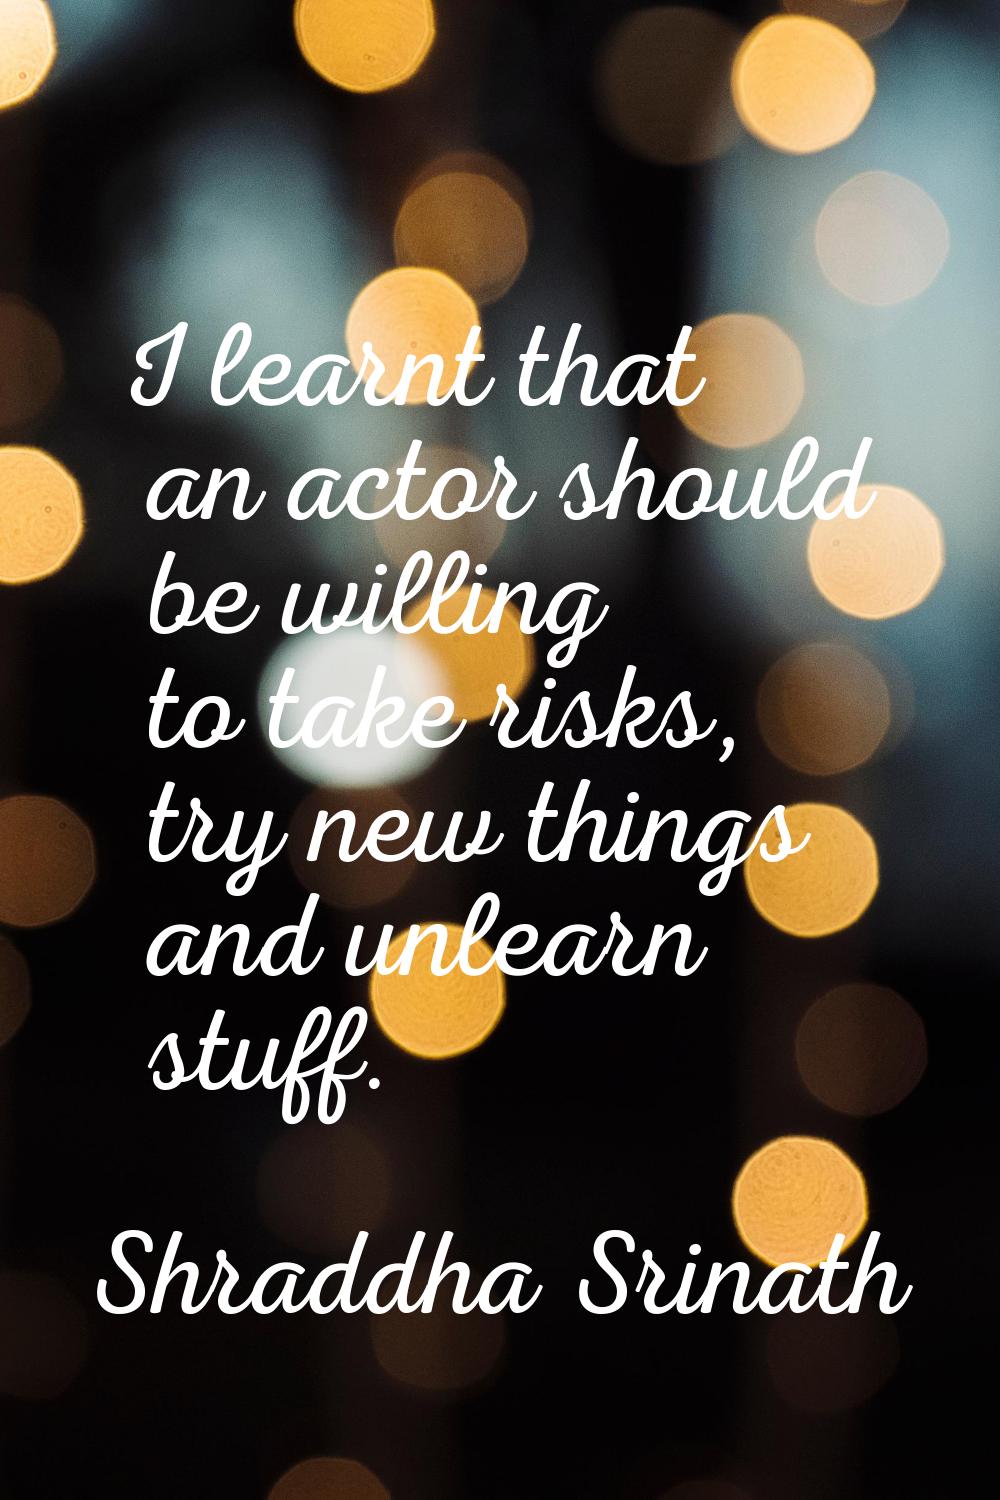 I learnt that an actor should be willing to take risks, try new things and unlearn stuff.